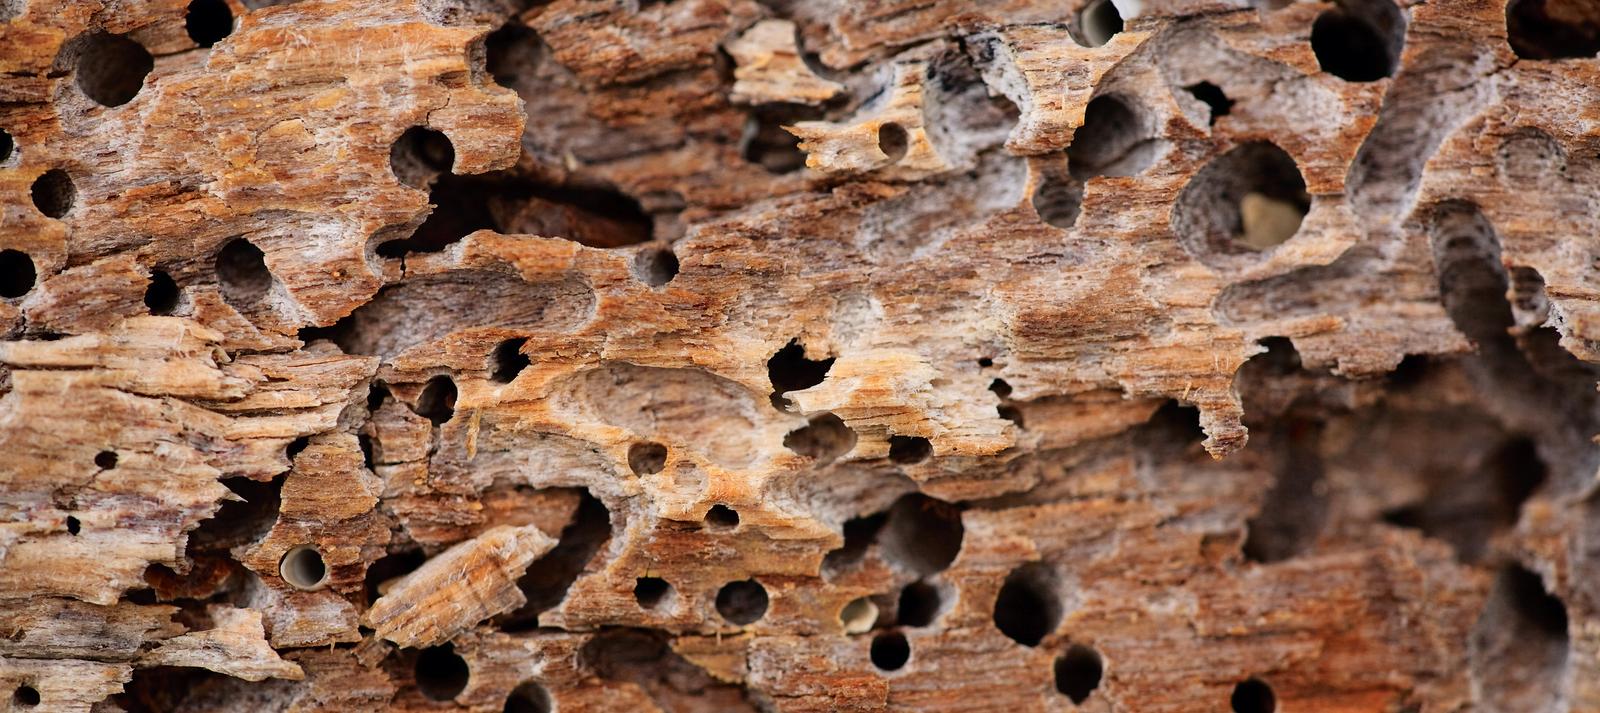 Ways to Stop Termites from Eating the Home